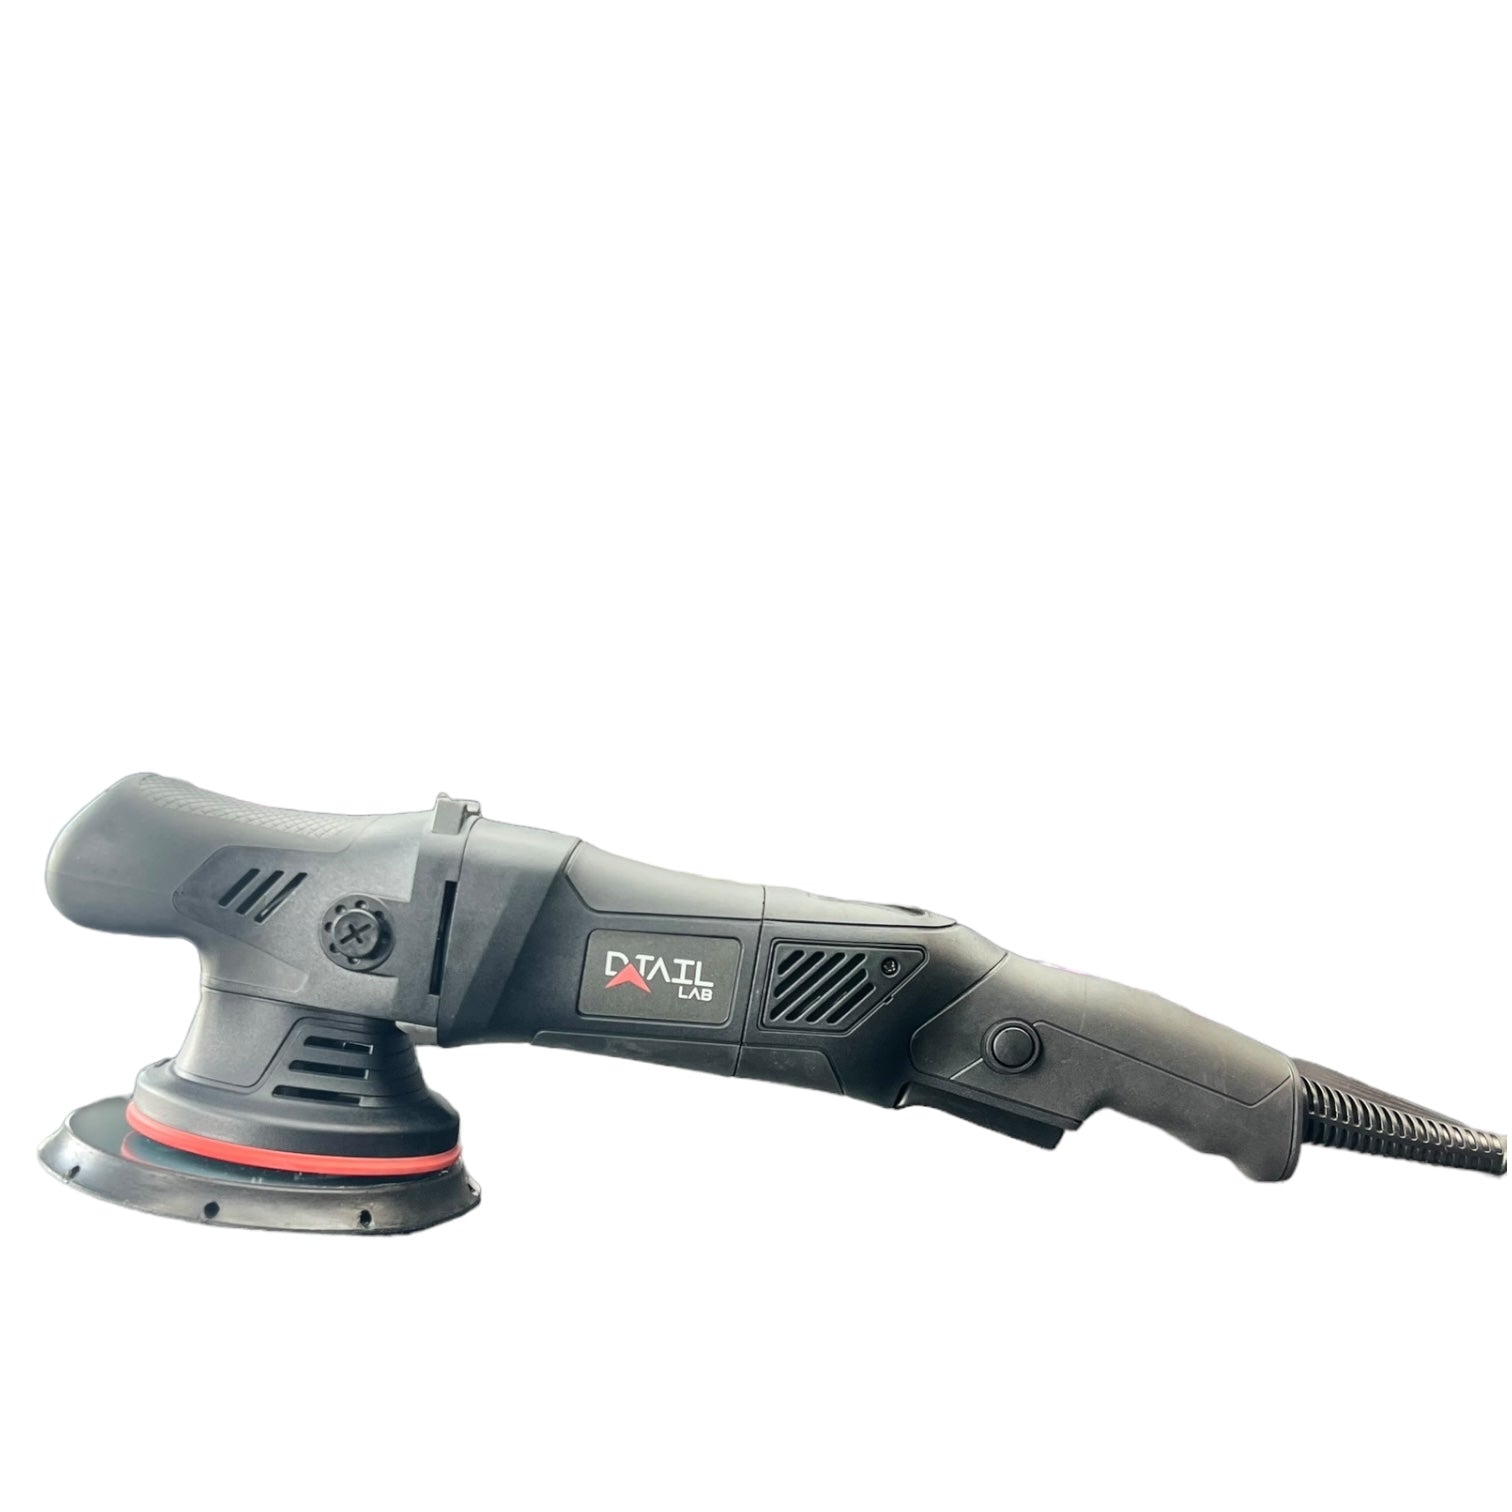 DDA21 21mm Dual Action Polisher by D-TAIL LAB